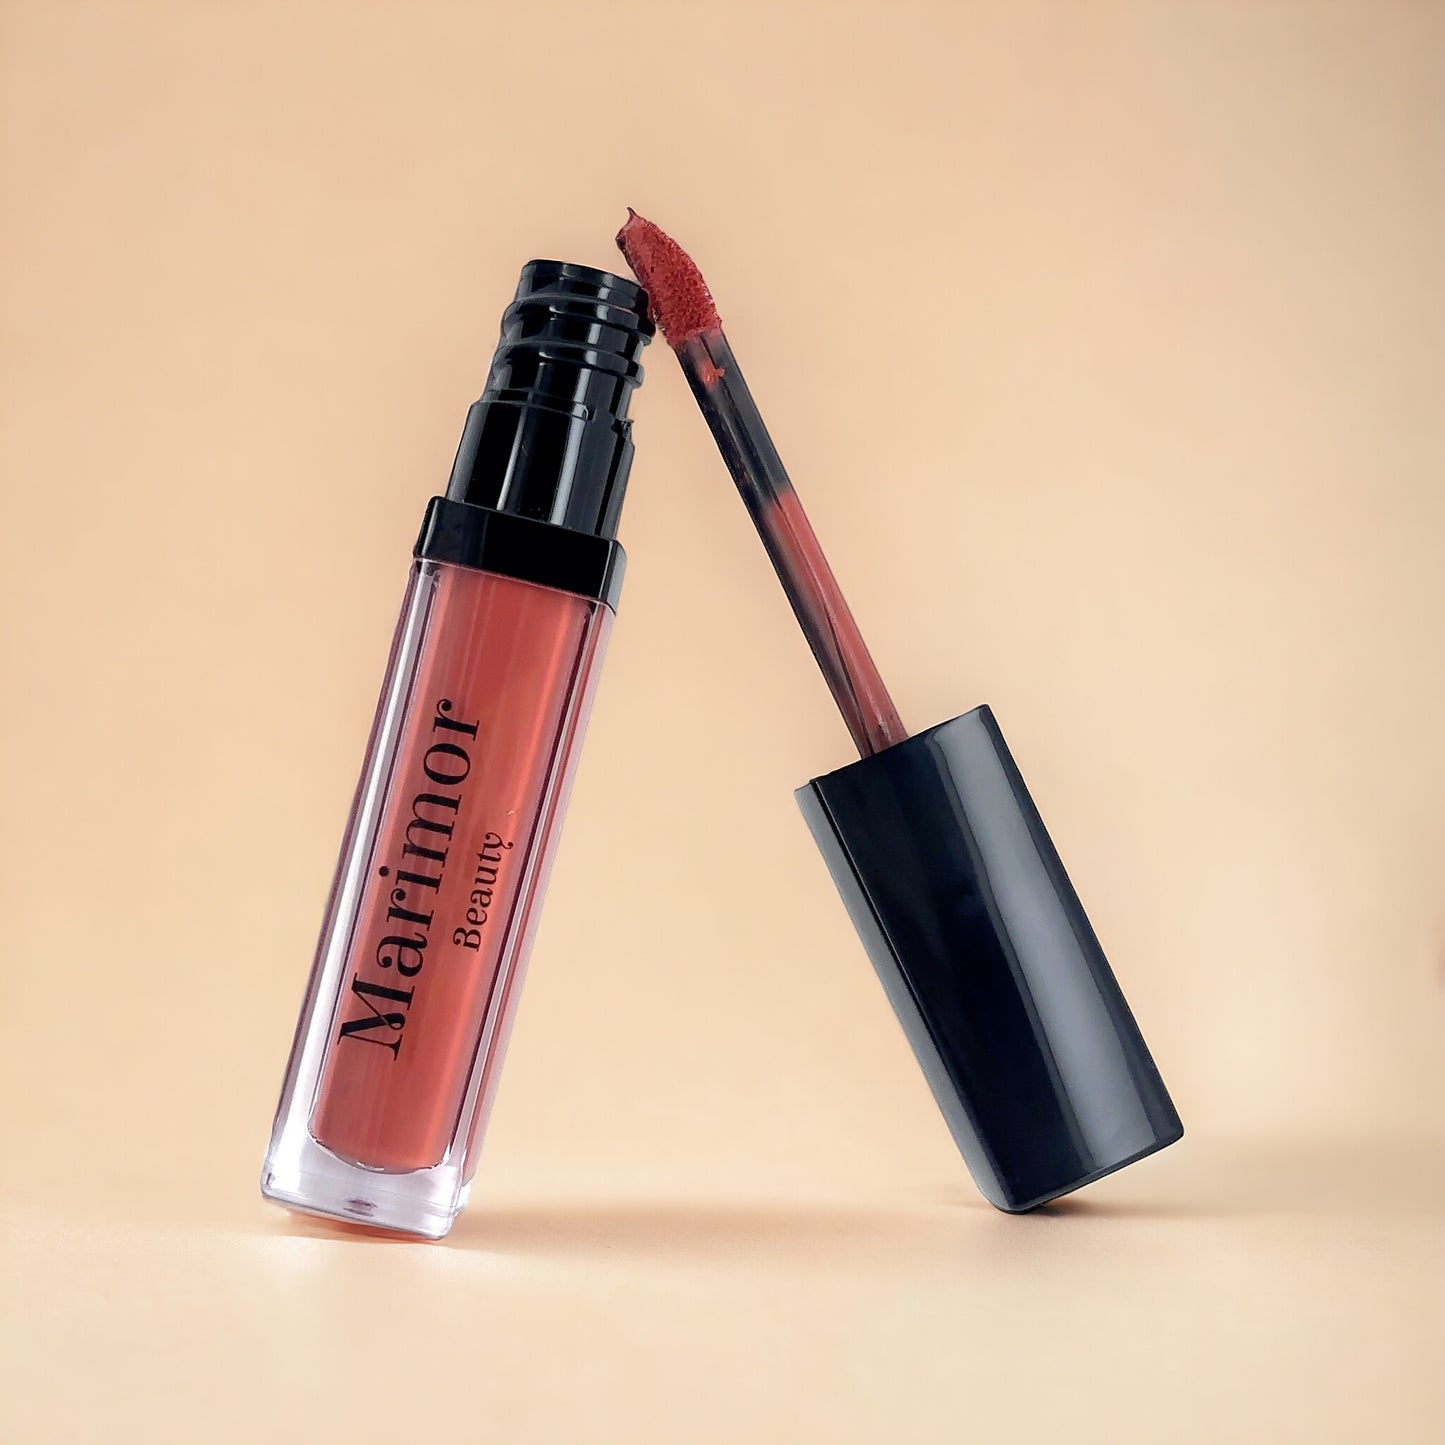 Rosed Hush: Elegance Embodied in Velvet Red – A Luxurious Matte Lipstick Experience